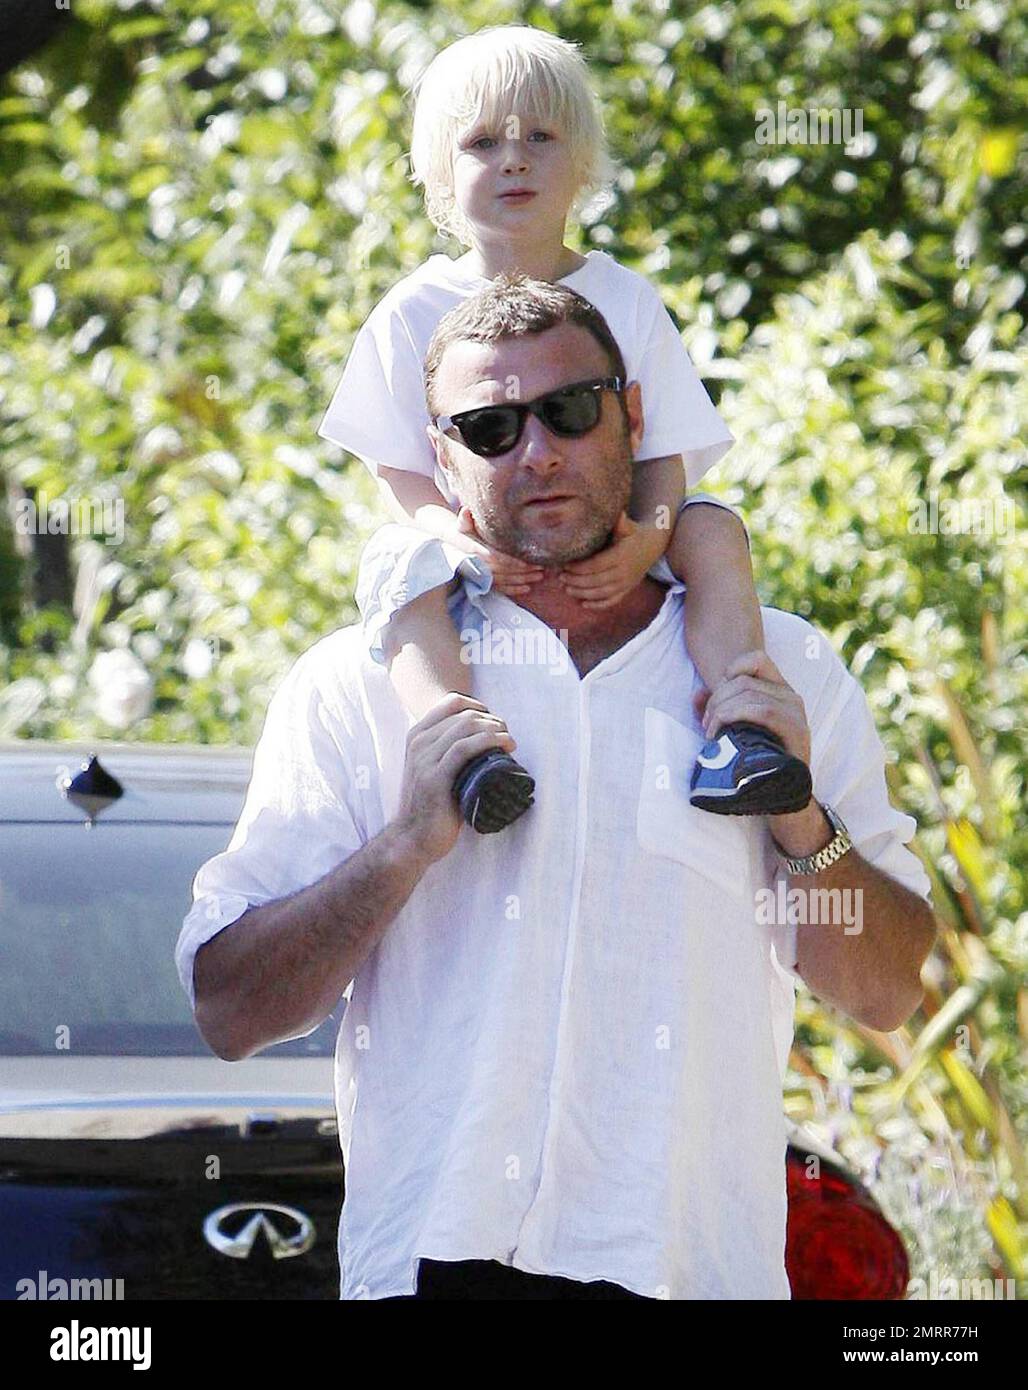 'Salt' actor Liev Schreiber gives son Alexander Pete a piggyback ride while on a walk with friends around the suburbs. Schreiber has recently been reported as saying, 'I think weÕre both ['Salt' co-star Angelina Jolie] in that place with our kids where theyÕre really amazing, right around three-years-old, when all the language starts to come out of them. ItÕs a very exciting period in someoneÕs life, both the childÕs and the parents, and it was fun to bond over that.' Schreiber has two sons with wife Naomi Watts, Alexander and Samuel Kai. Los Angeles, CA. 07/24/10. Stock Photo